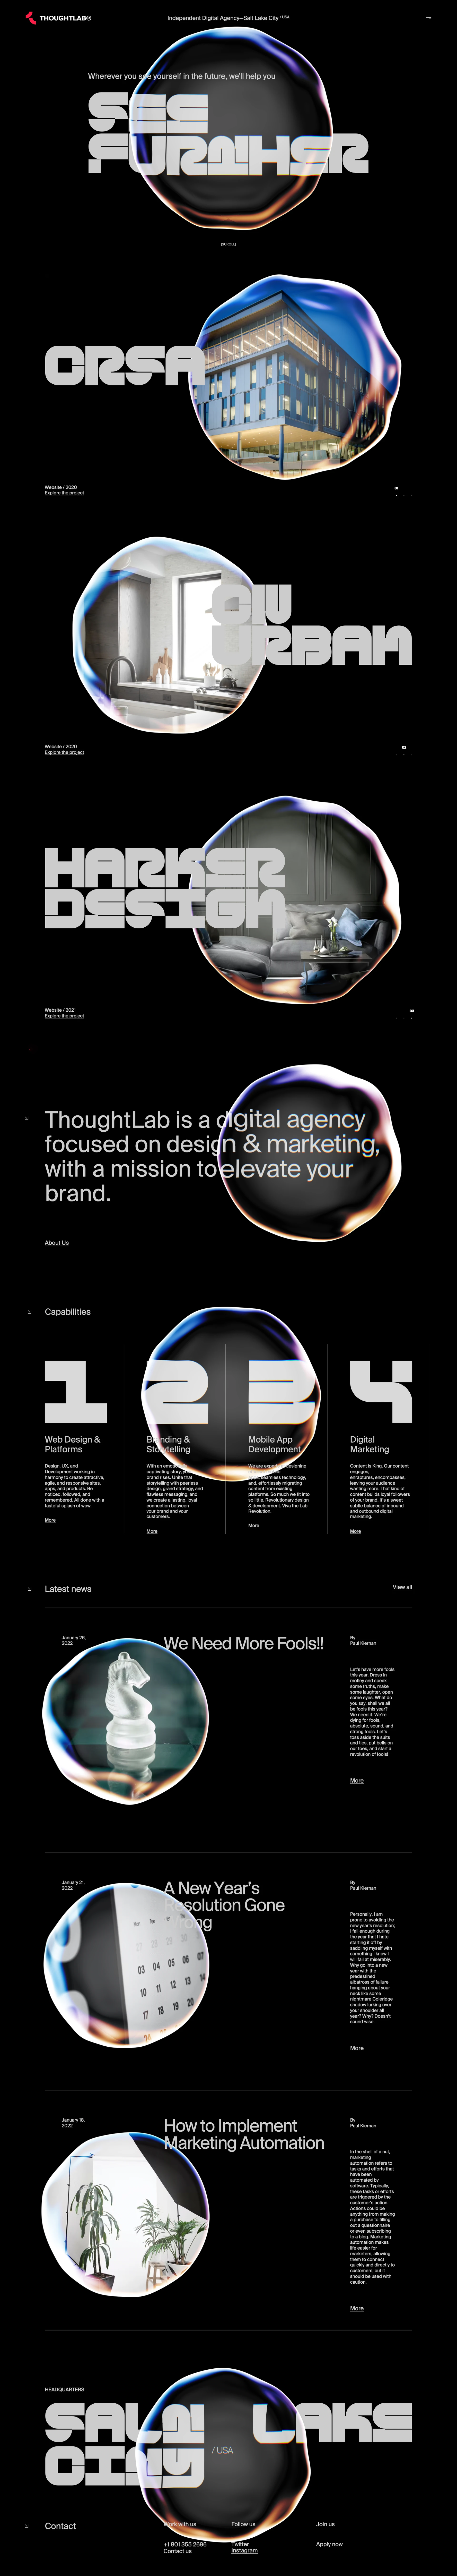 ThoughtLab Landing Page Example: Elevate your brand with storytelling that inspires, award-winning designs and full spectrum digital marketing services. Get started with ThoughtLab today.